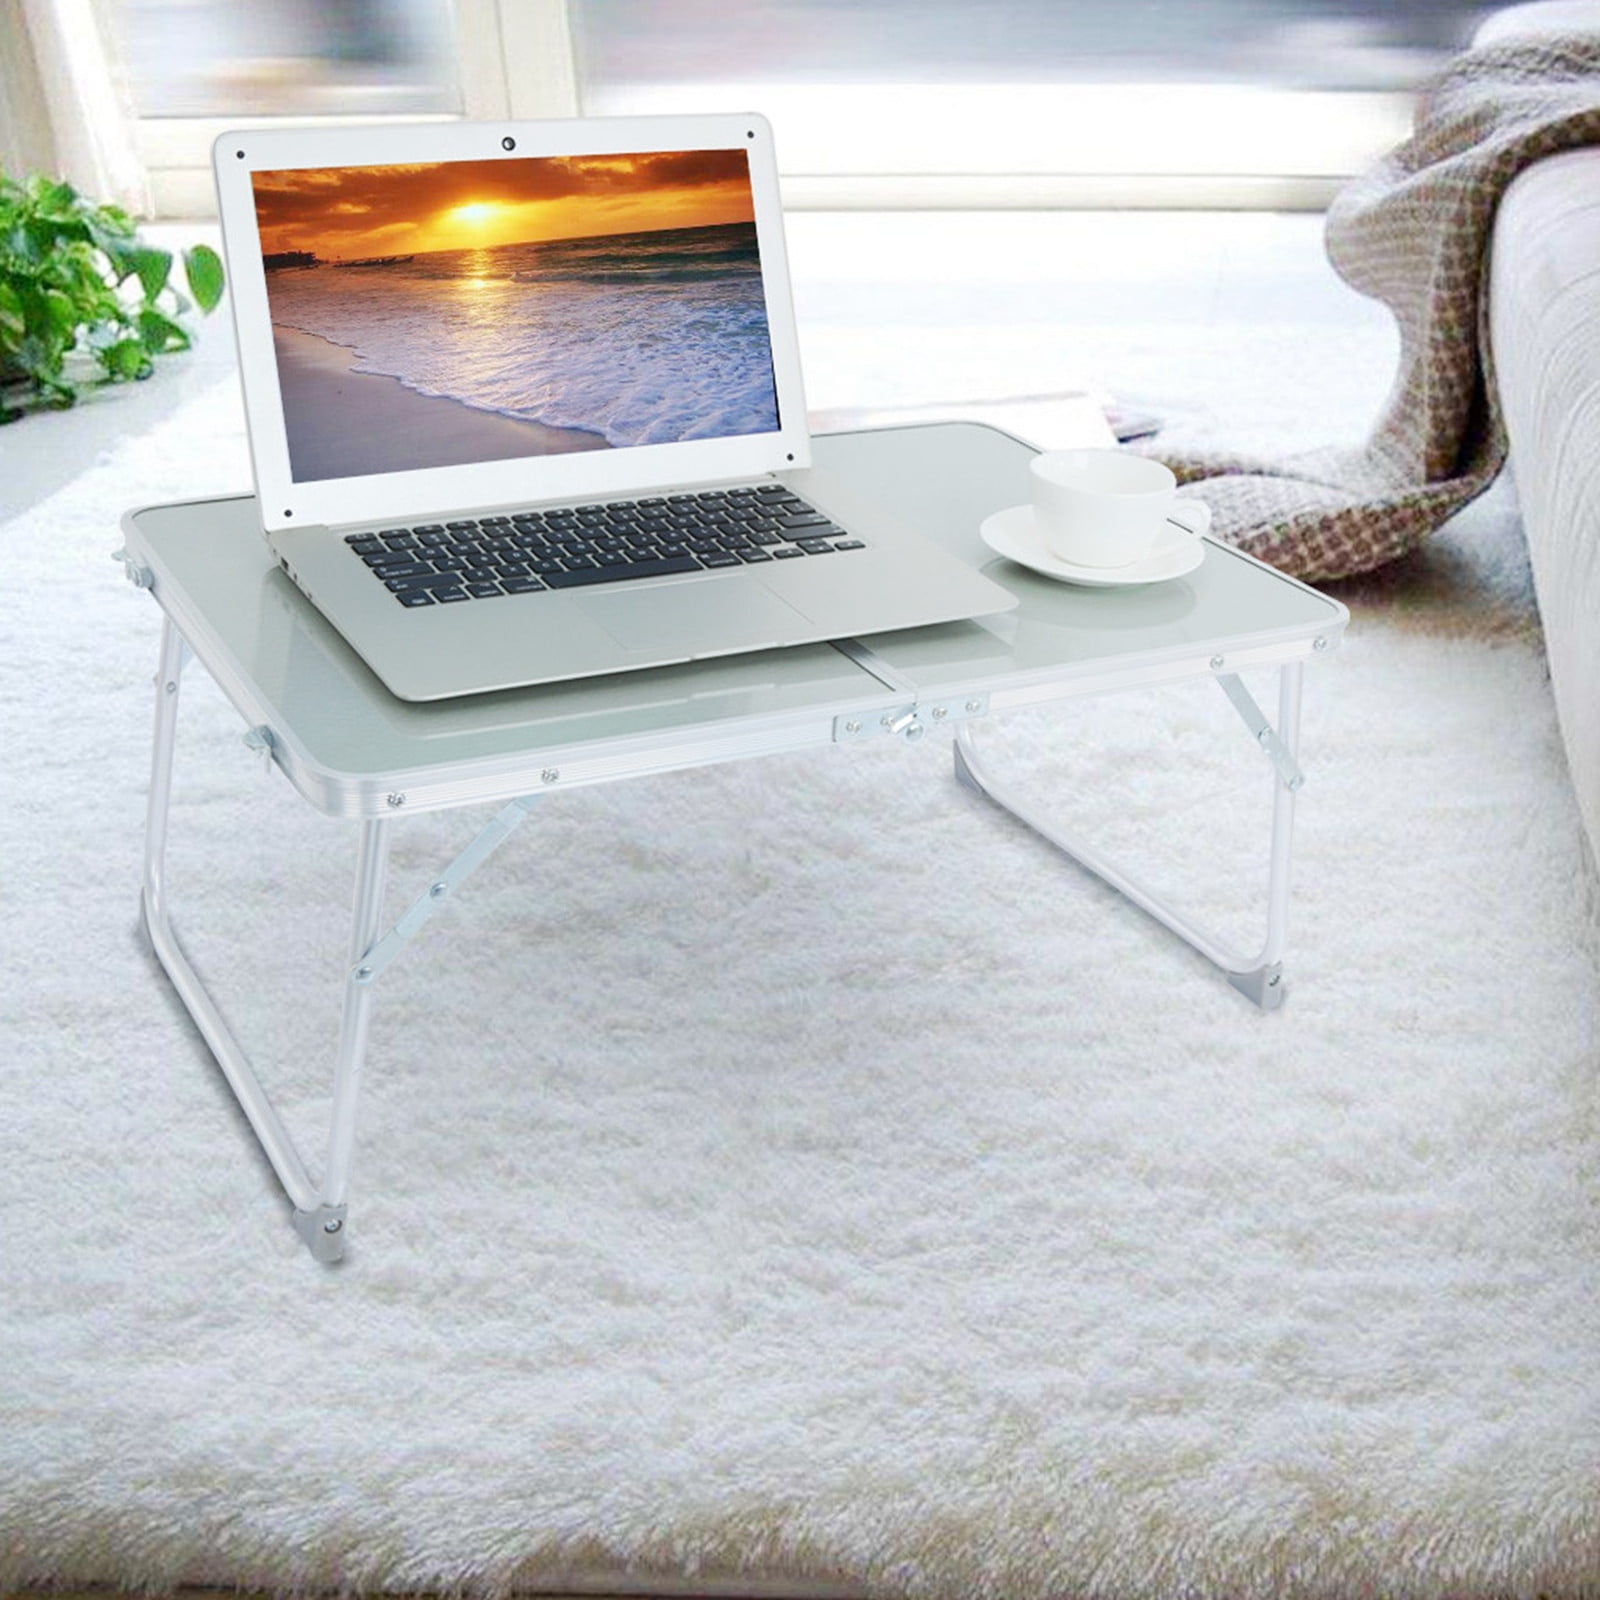 Details about   Large Bed Tray Foldable Portable Multifunction Laptop Desk Lazy Laptop Table 